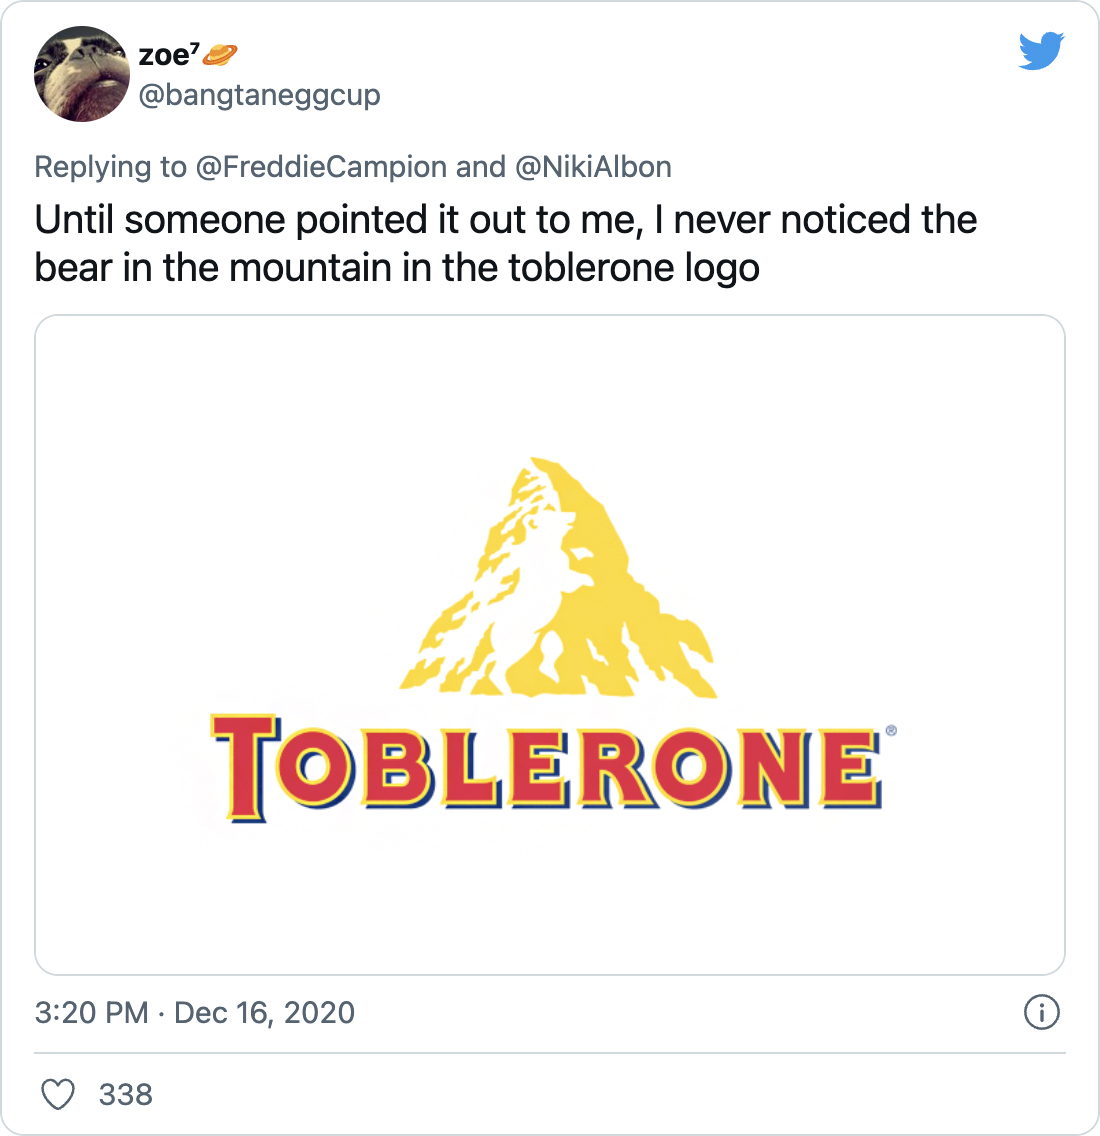 Until someone pointed it out to me, I never noticed the bear in the mountain in the toblerone logo - @bangtaneggcup